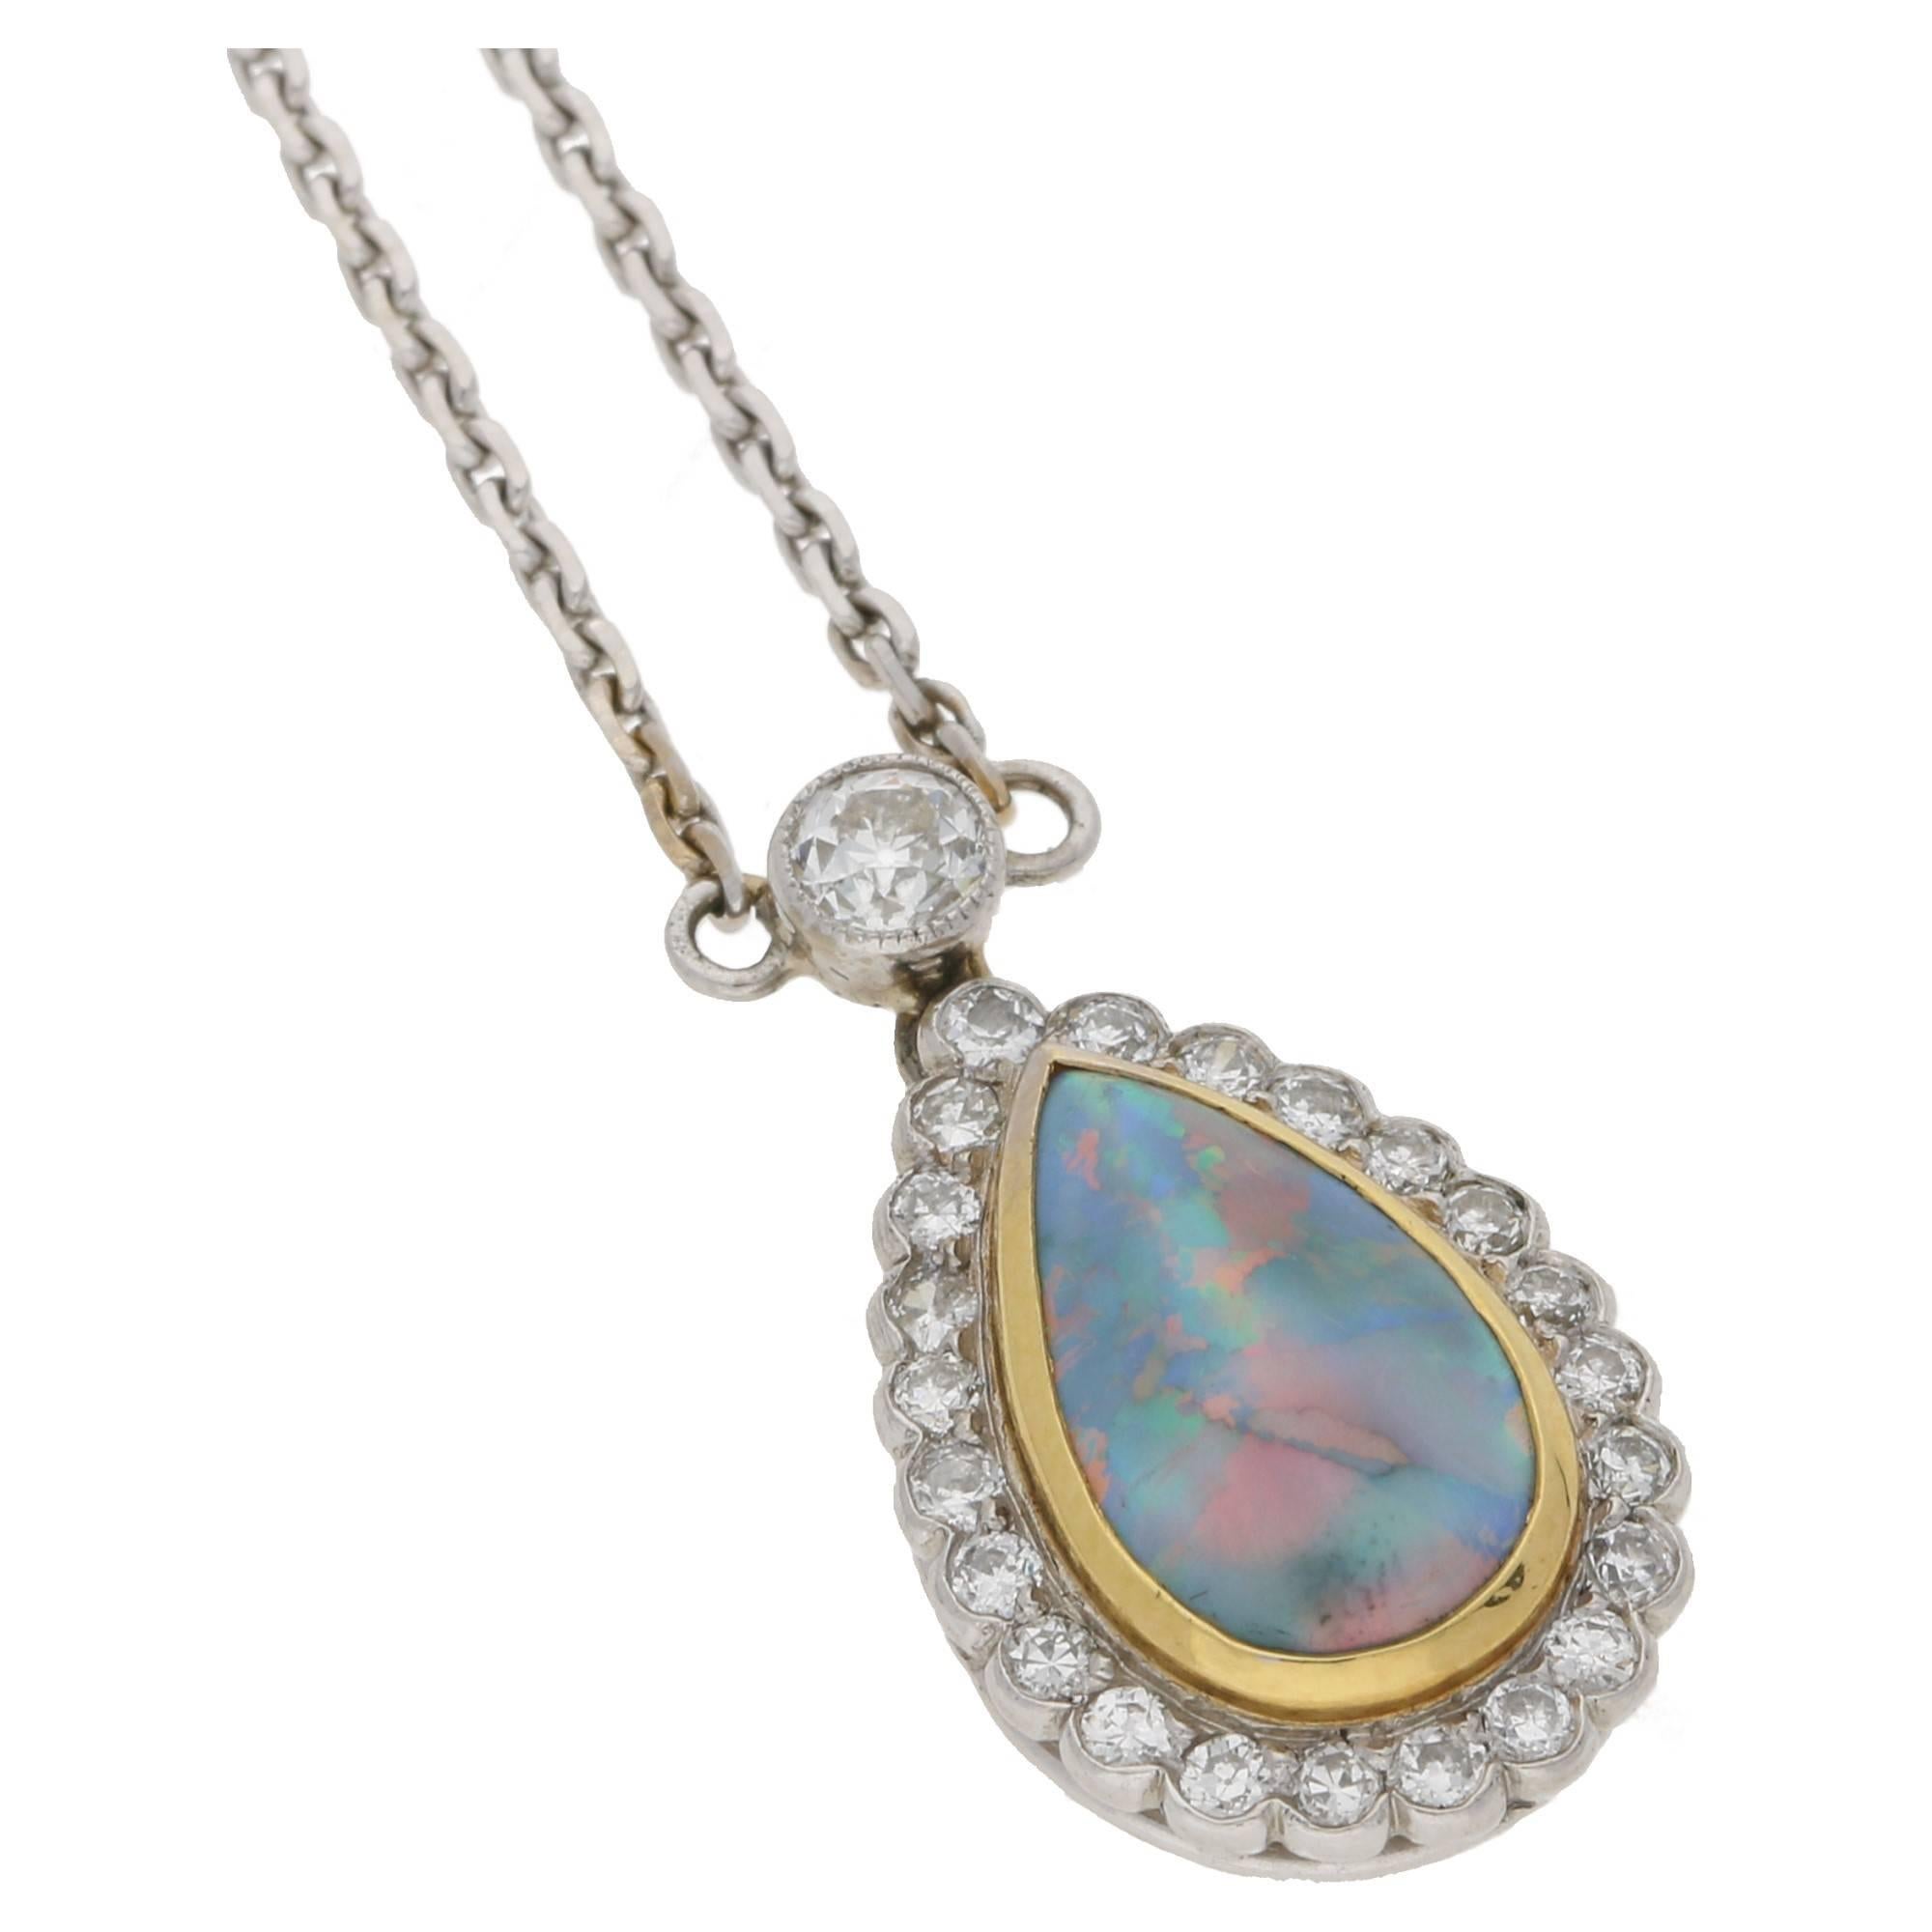 An opal and diamond cluster pendant. The pendant is formed of one tear drop black opal, rub-over set to the centre in yellow gold with twenty three Old European cut diamonds in a millegrain setting forming the outer detail. The pendant is suspended